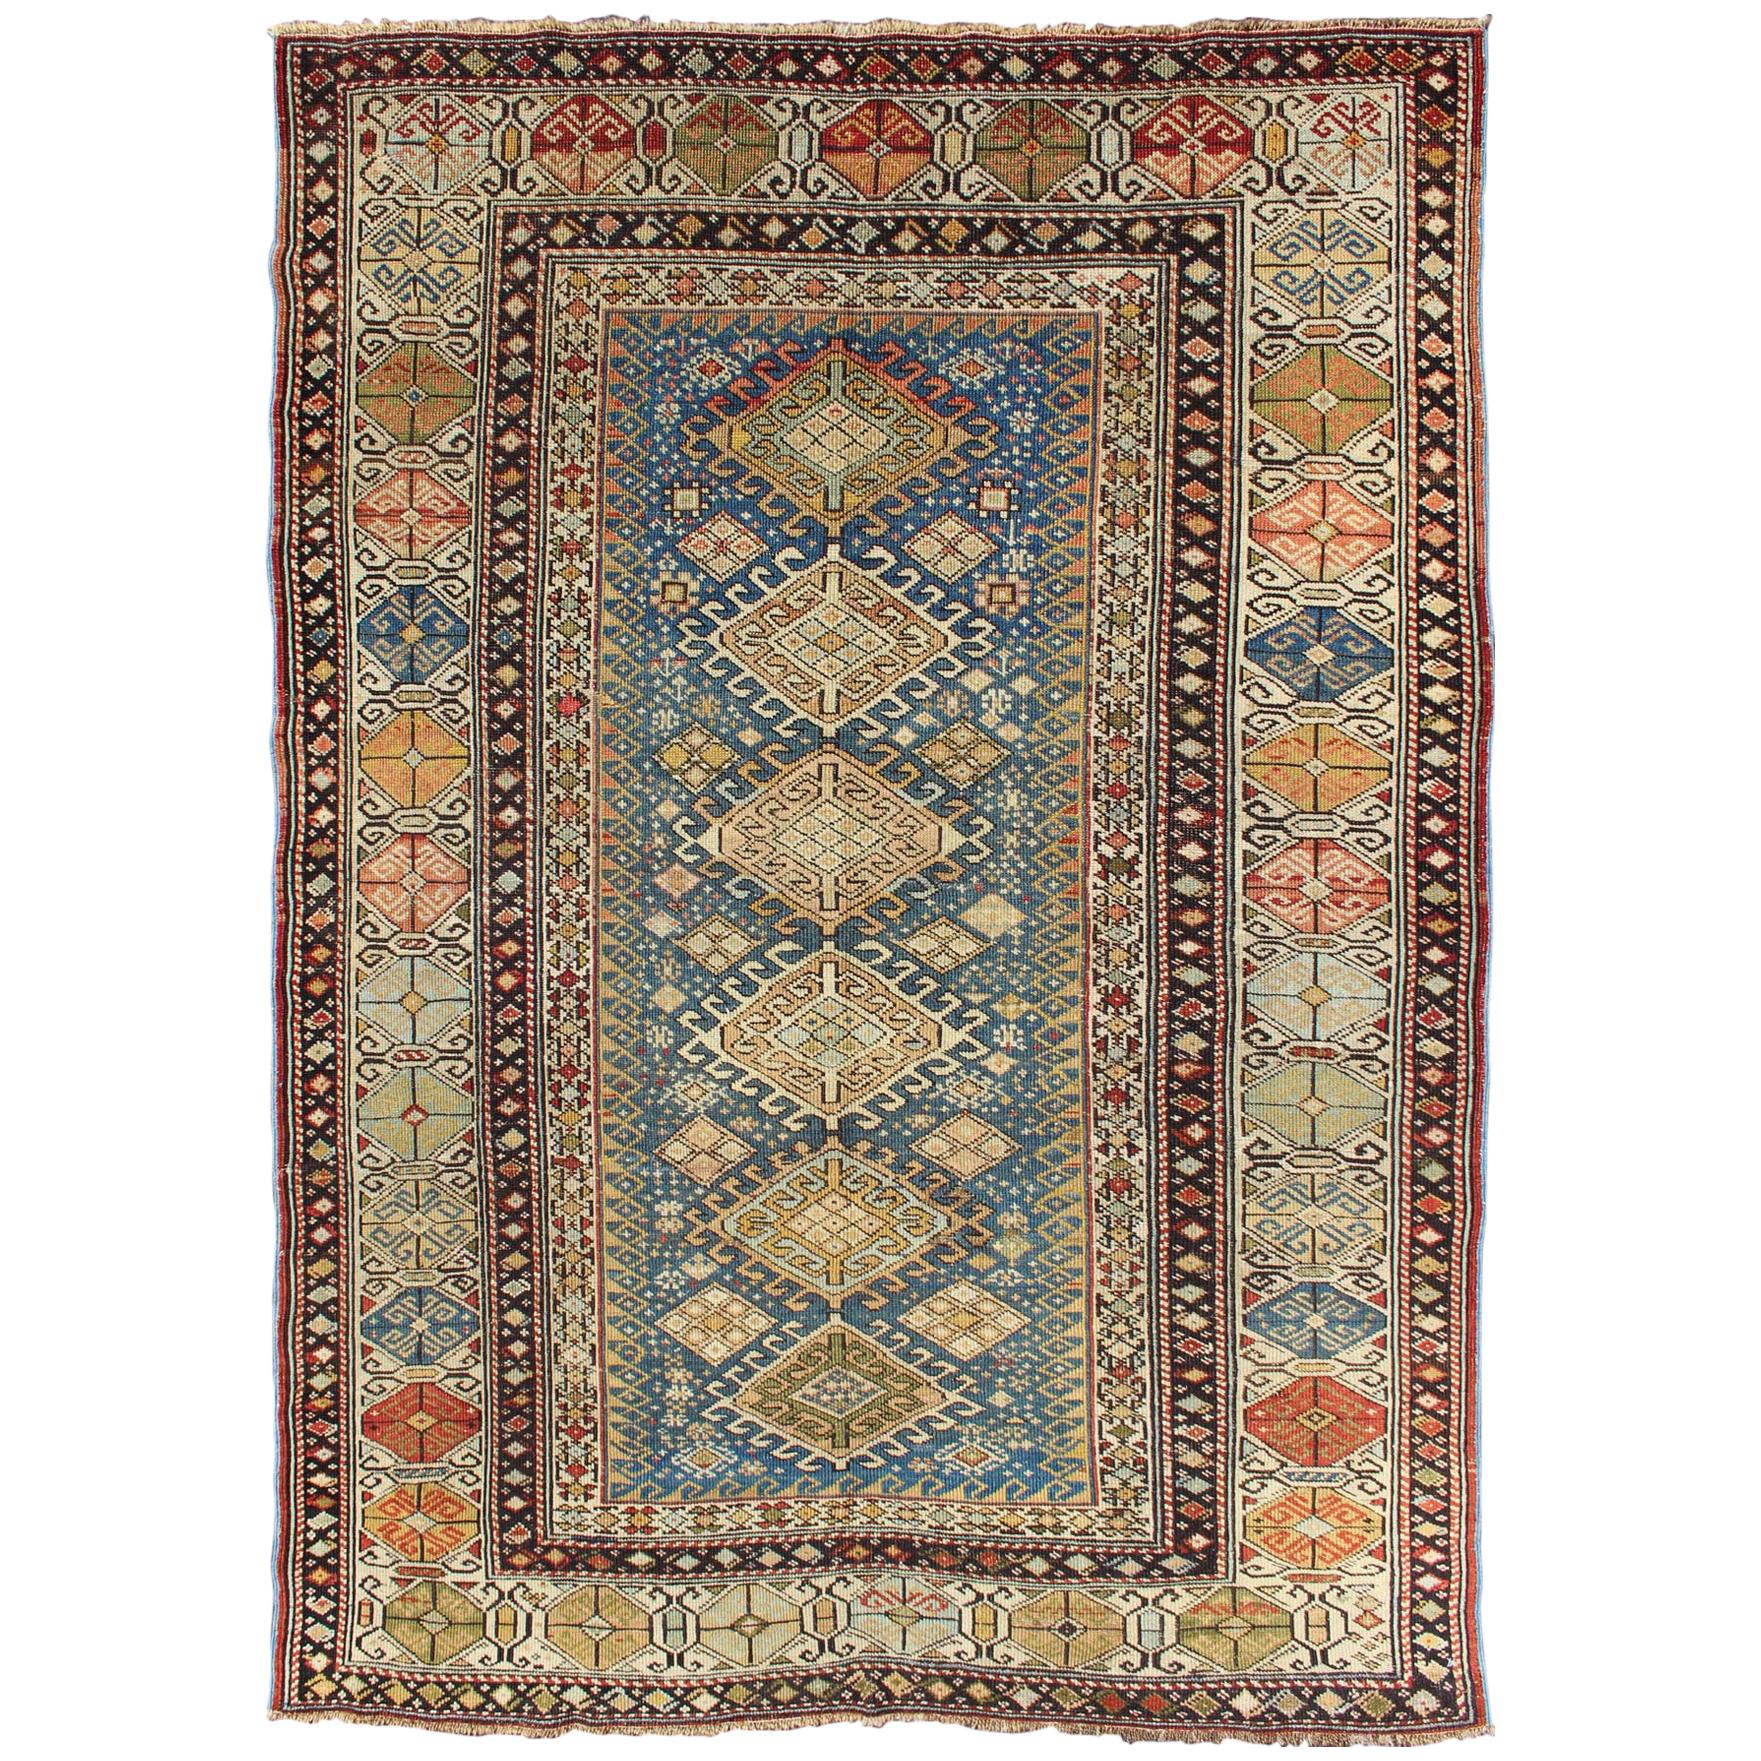 Antique Shirvan Rug in Teal Blue Background with Exquisitely Intricate Design For Sale